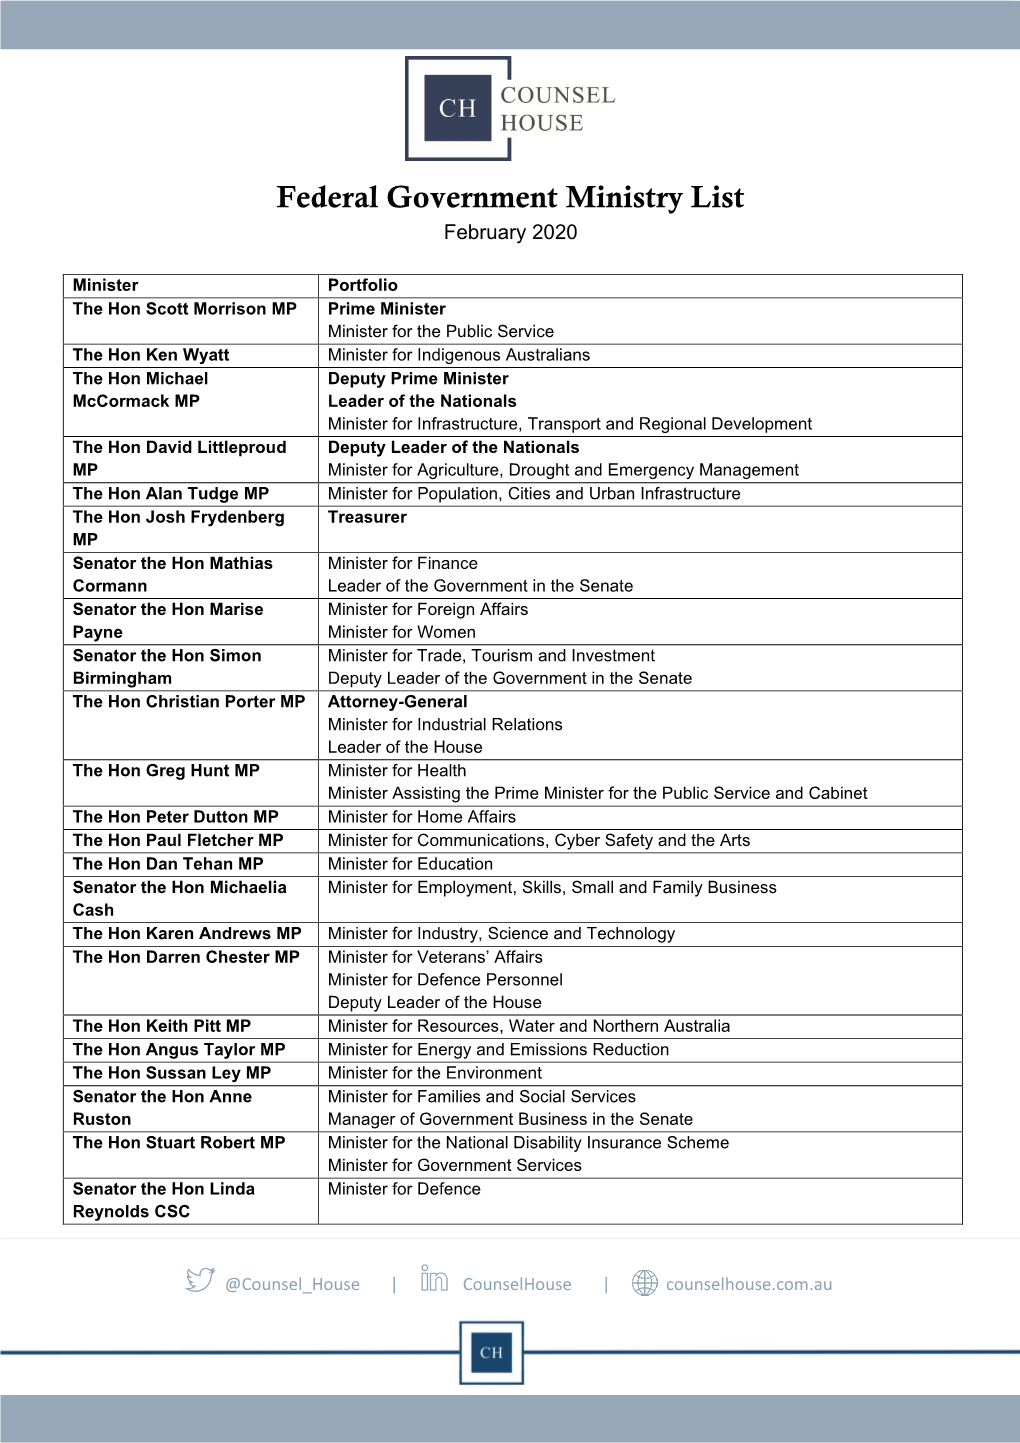 Federal Government Ministry List February 2020